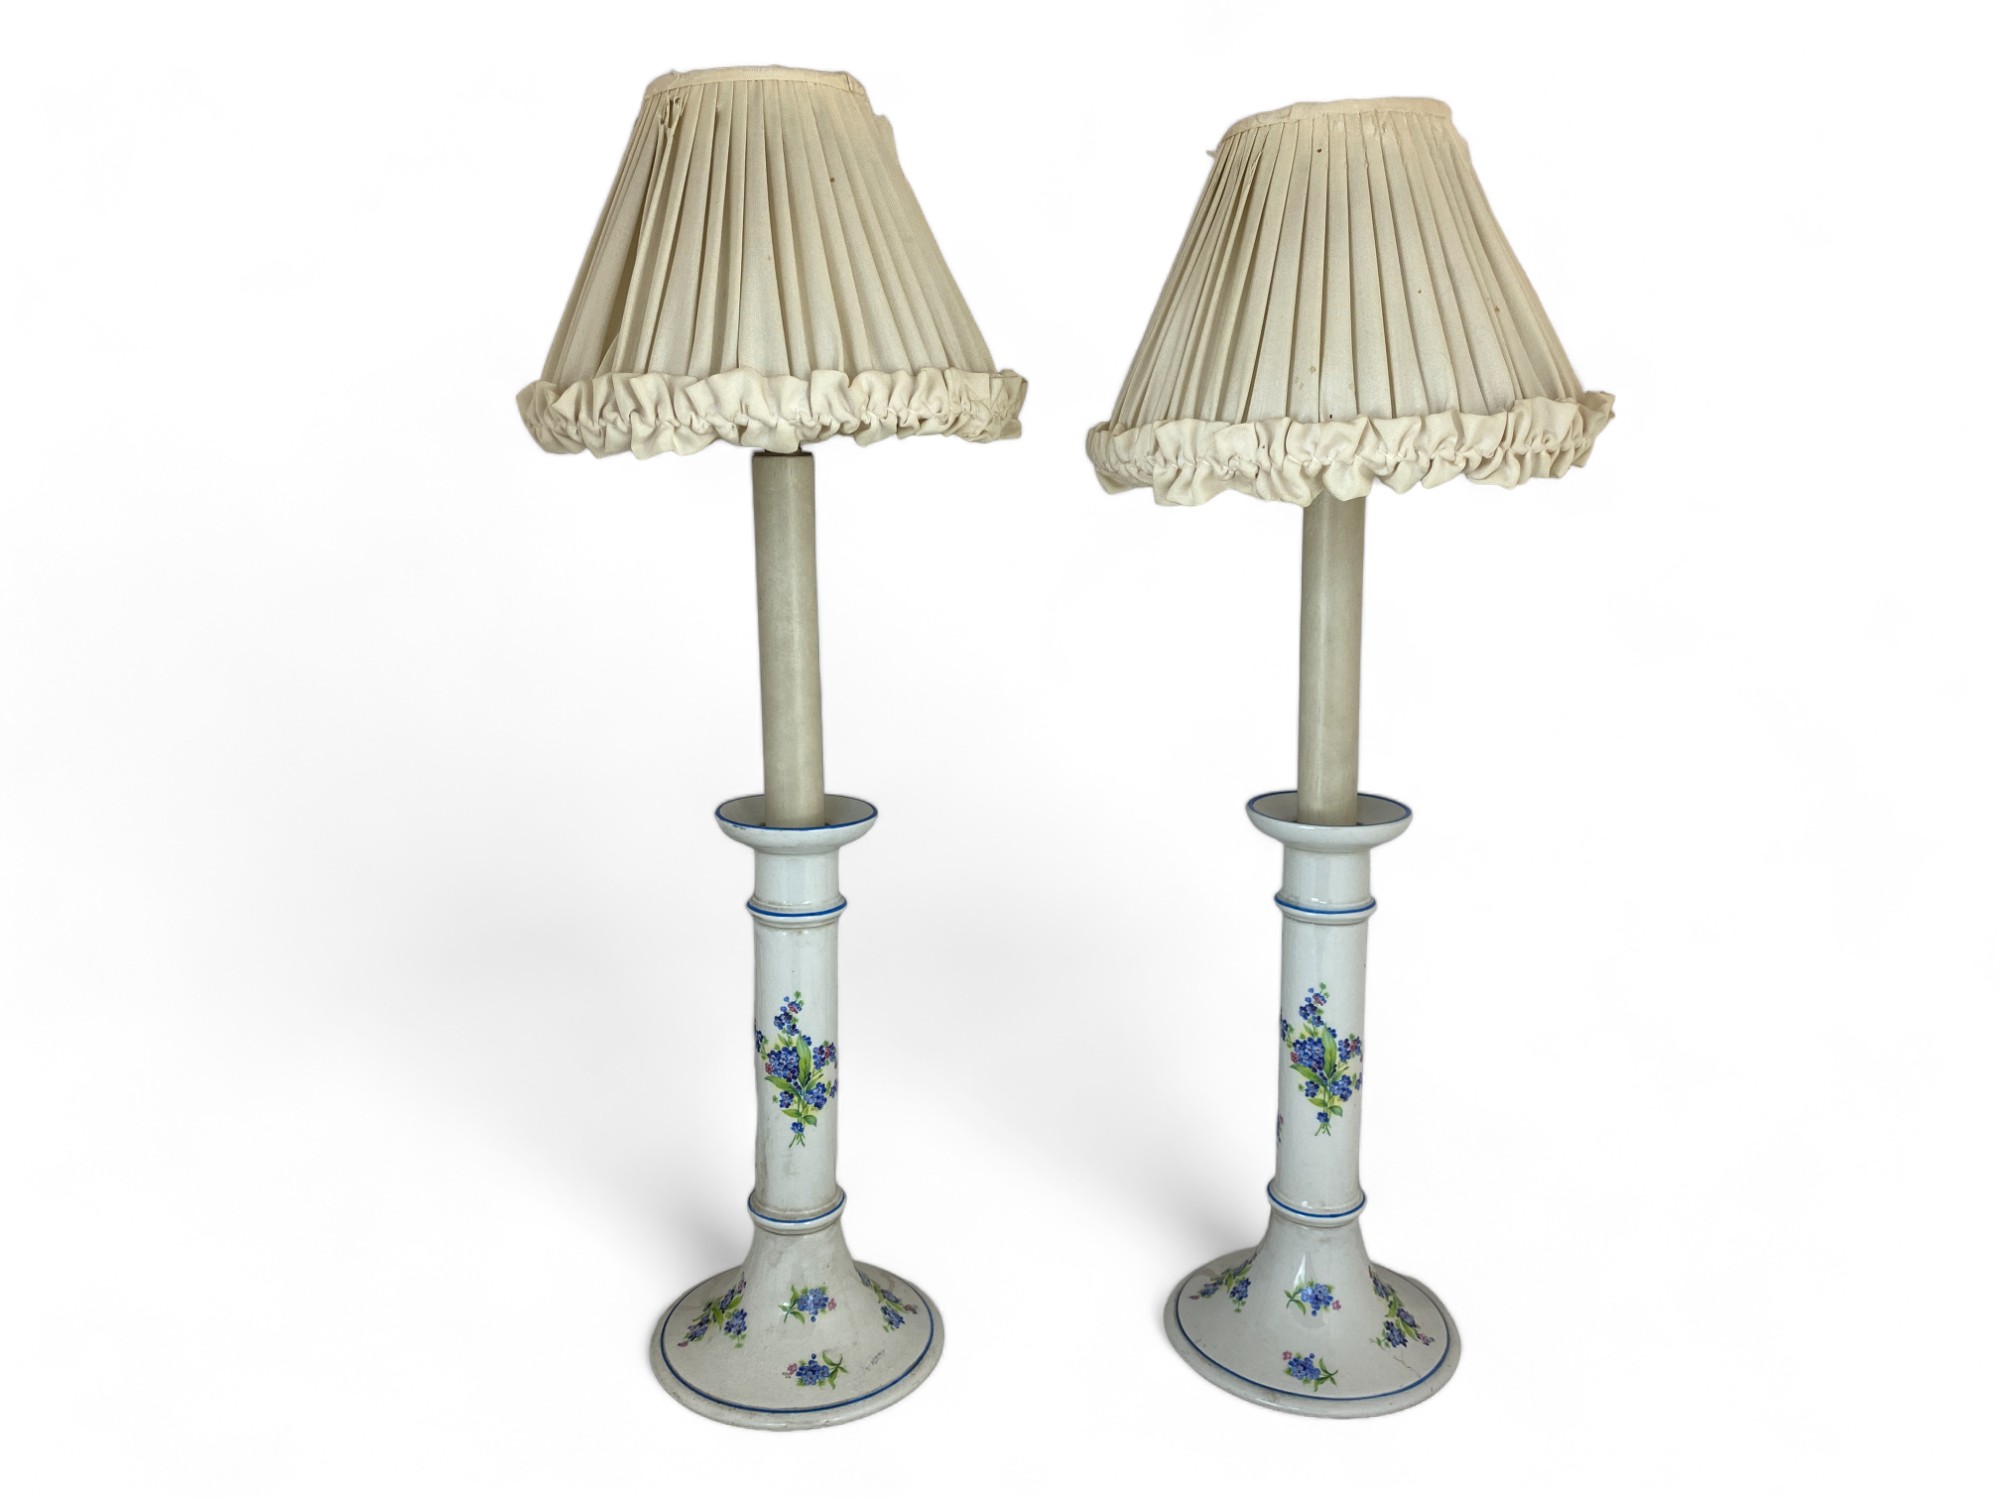 A pair of white porcelain blue floral decorated candlestick table lamps